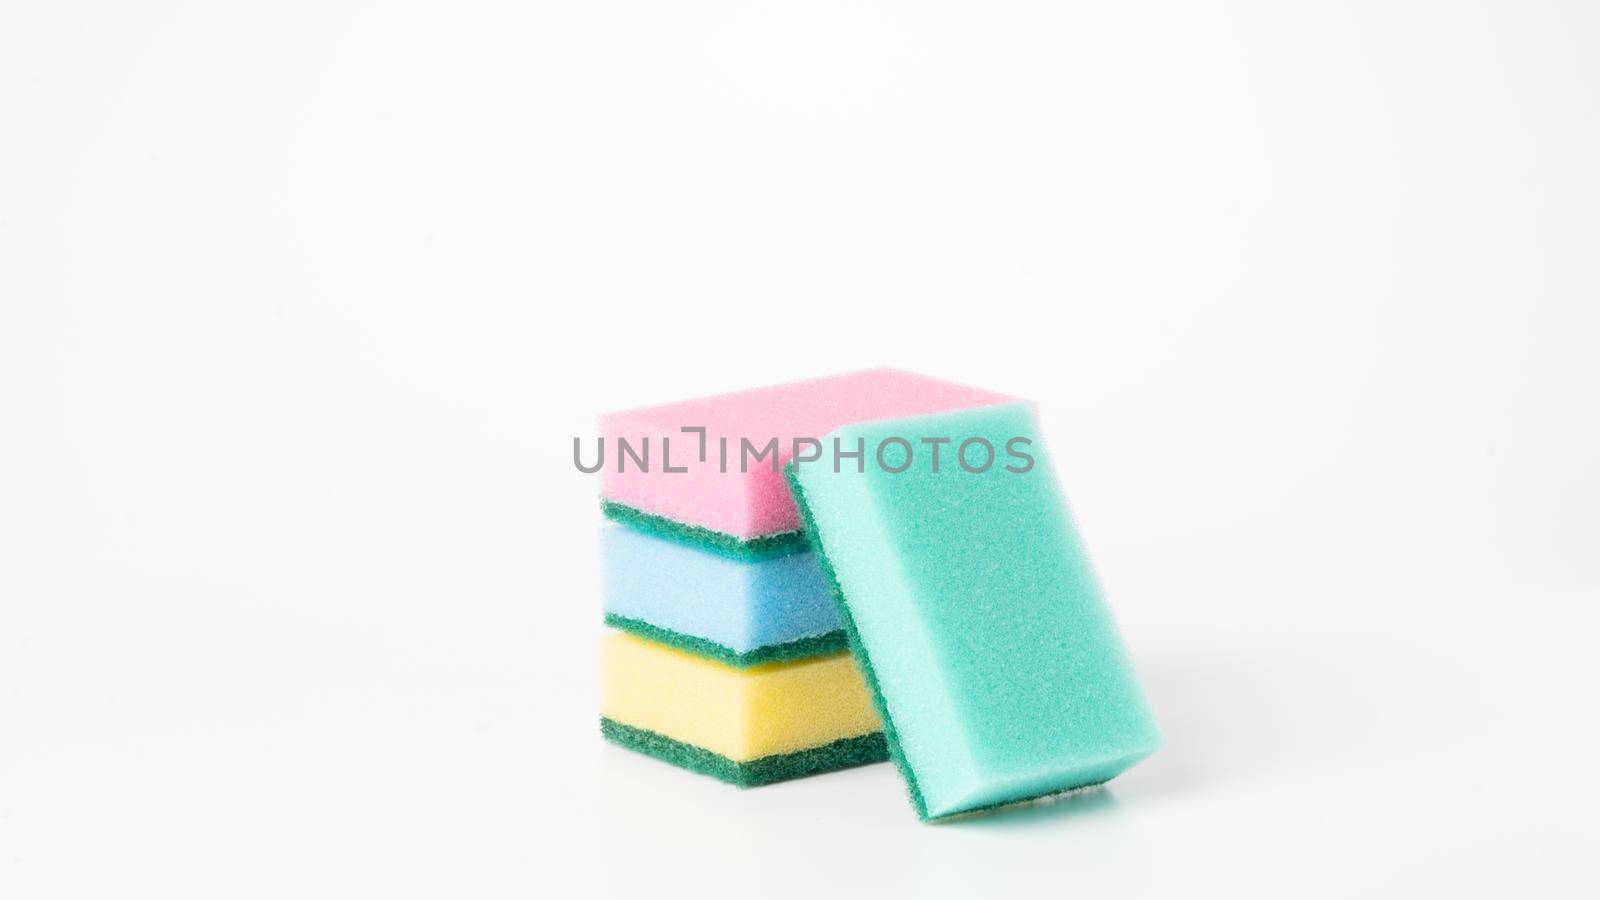 Colored sponges in a stack on a white background of the object by voktybre